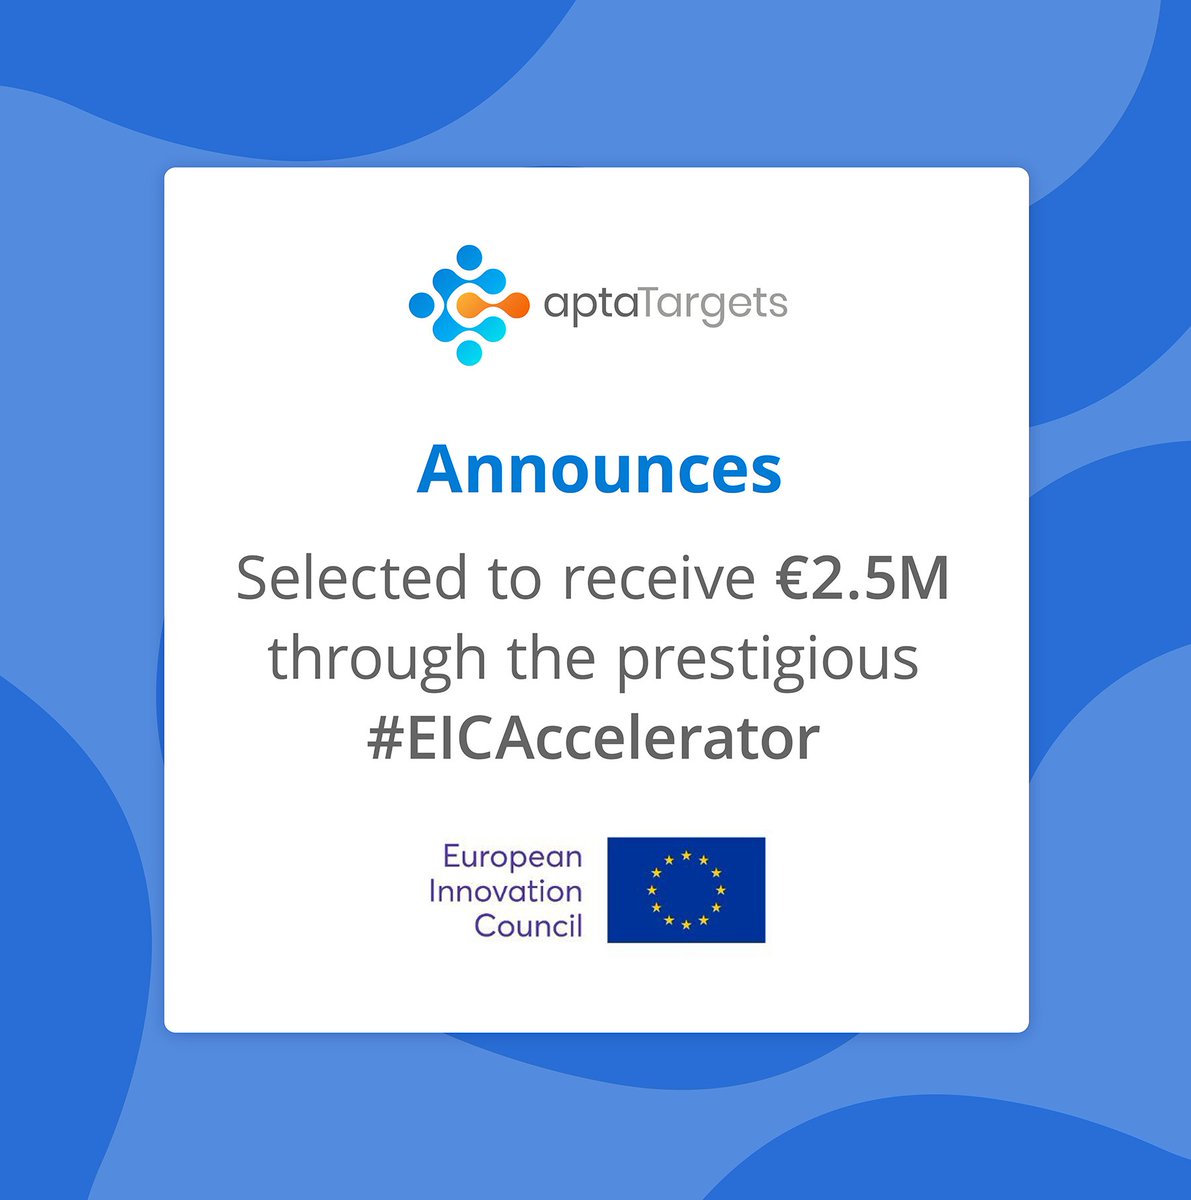 We are thrilled to announce that over 1,000 companies in Europe, aptaTargets was selected for the #EICAccelerator by @EUeic.

It secures €2.5M grant to start the Phase 2b clinical trial with #ApTOLL in patients with #AcuteIschemicStroke:

bit.ly/3v5tg0O